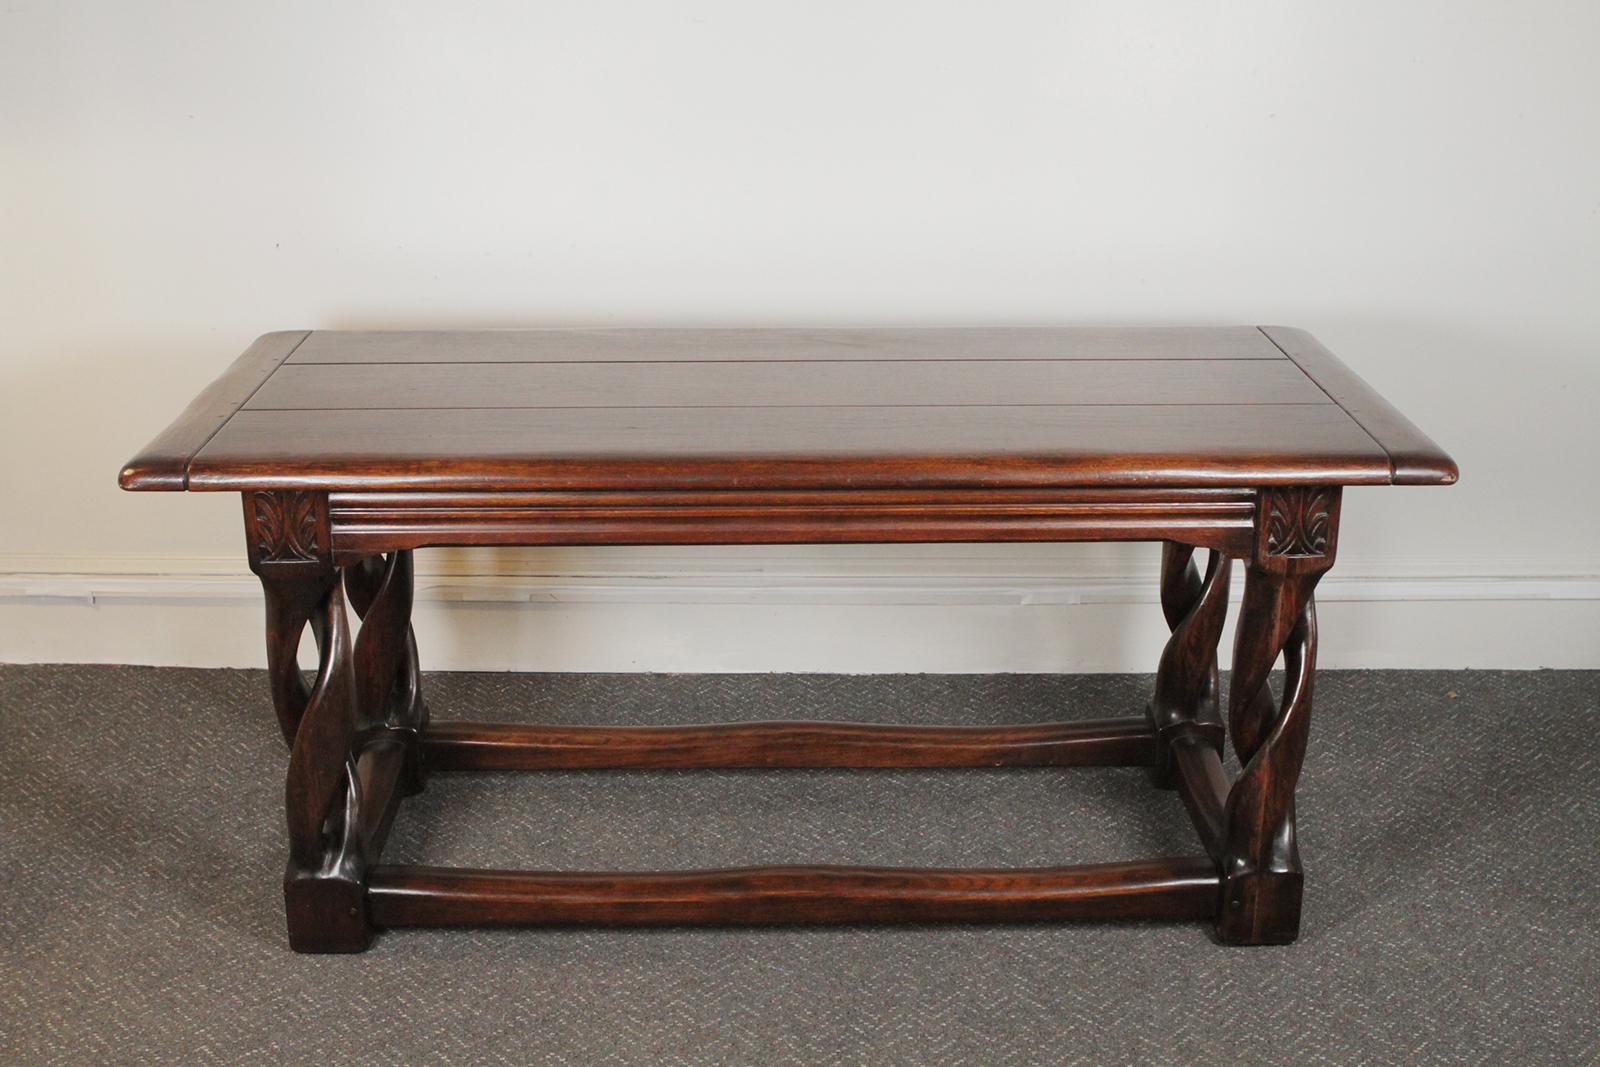 Solid oak Gothic library / centre table hand carved and pegged, circa 1900-1910.
Dimensions: 66” W x 29.5